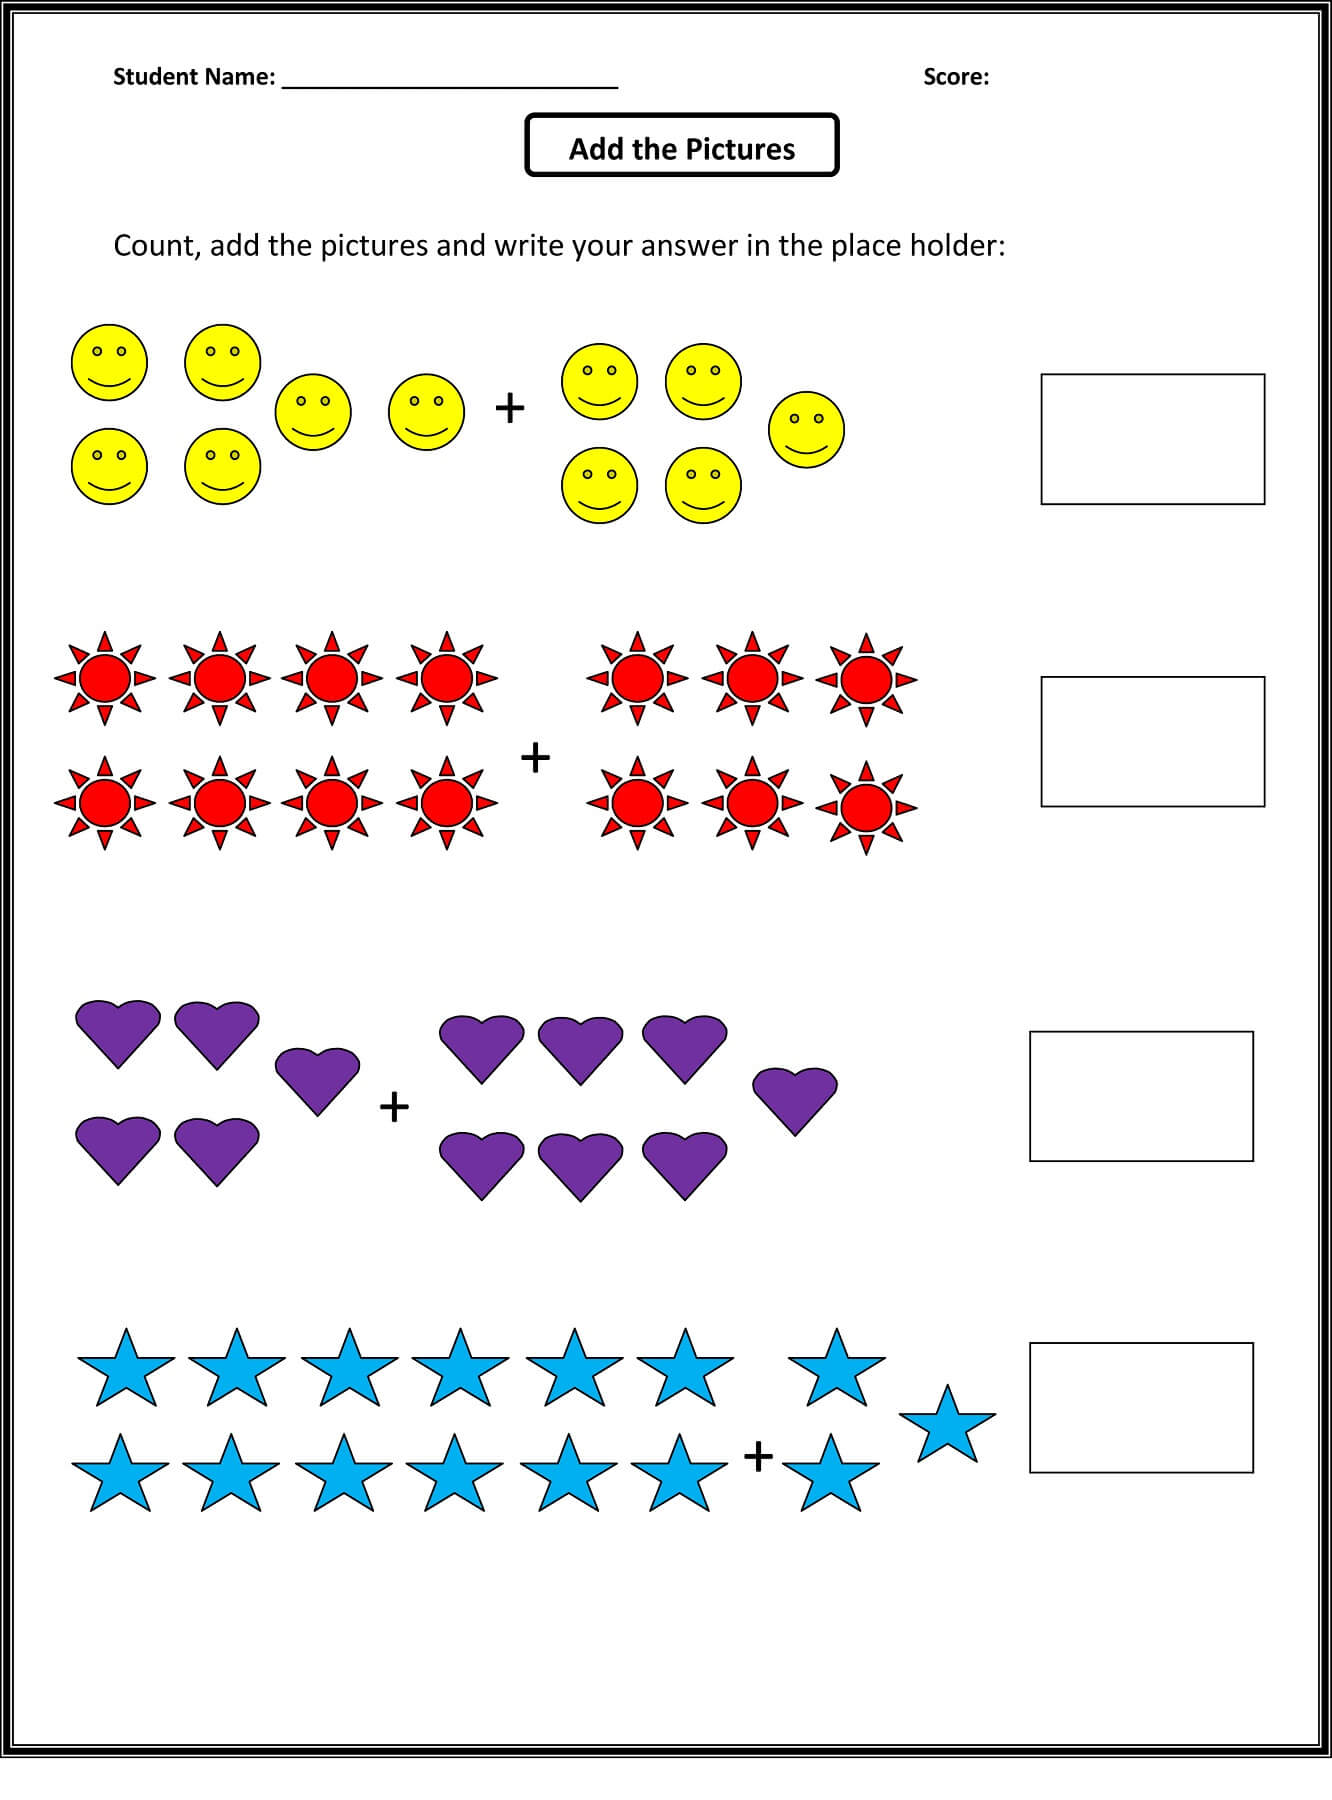 Add the Pictures Addition Worksheet